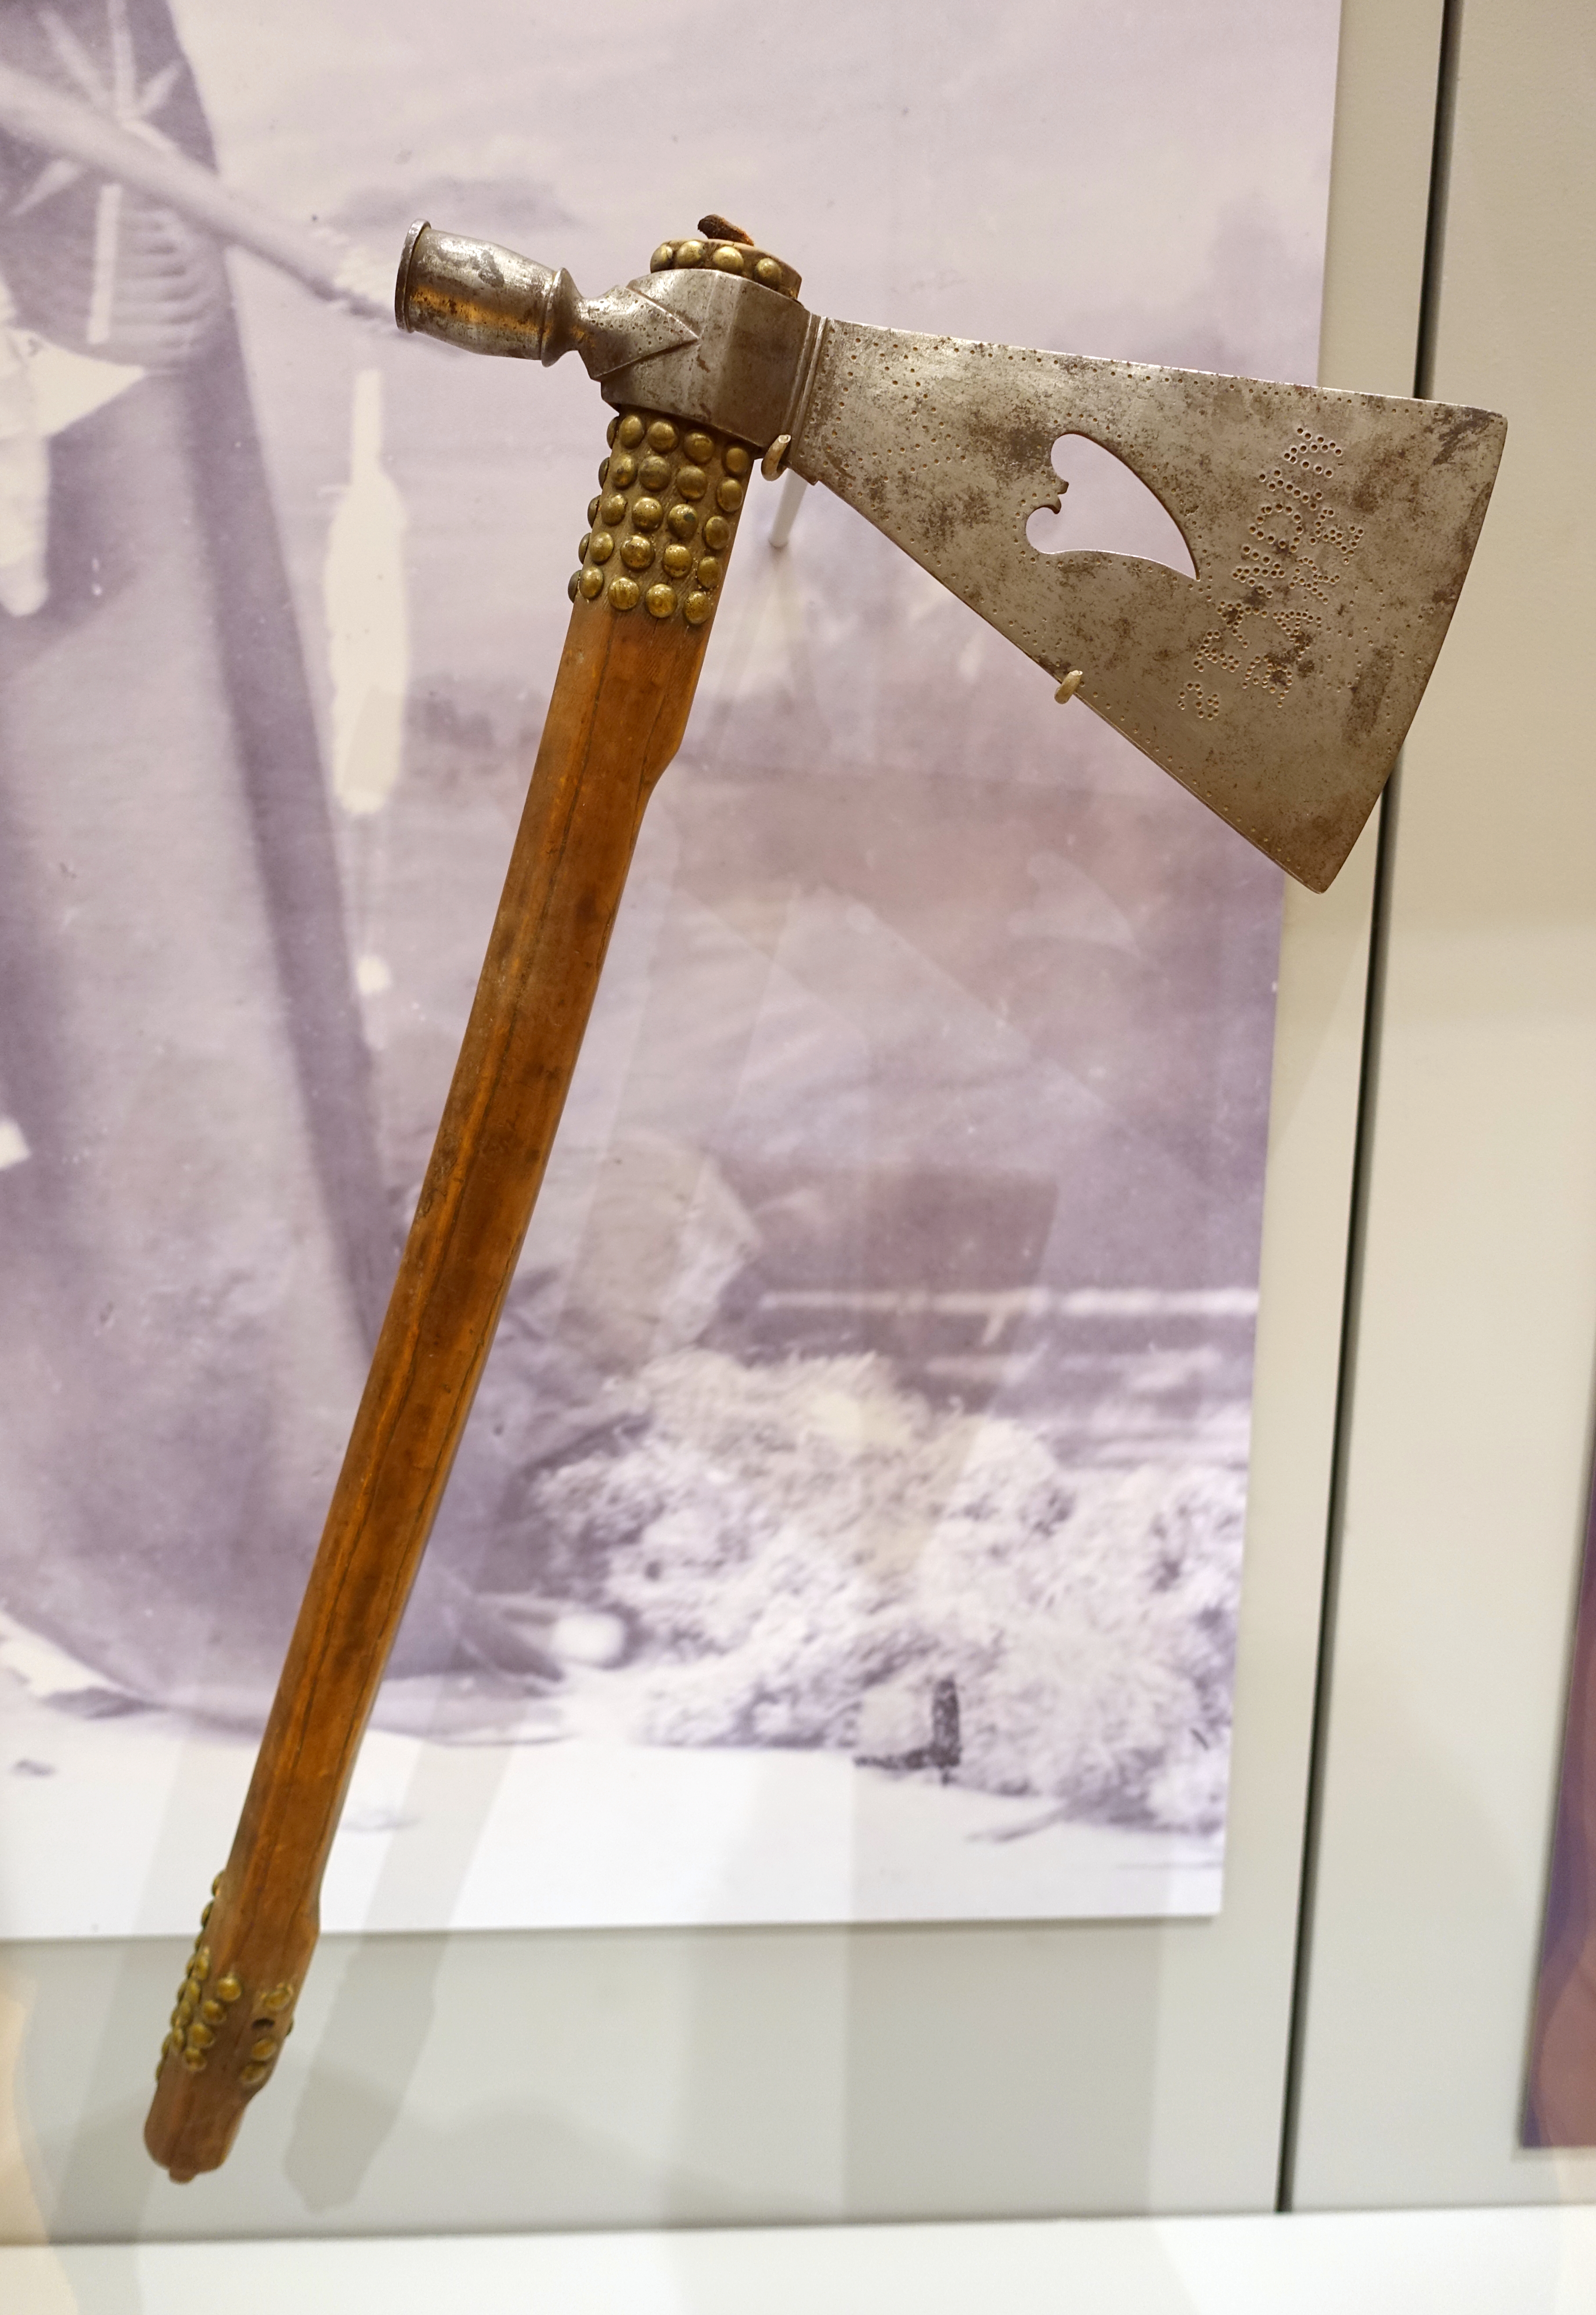 Standing Bear’s pipe-tomahawk, photographed in May 2017 on display in the Native American Collection at the Peabody Museum at Harvard University in Cambridge, Mass. The museum returned the object to the Ponca tribe in a ceremony held on June 3. Standing Bear, a Native American civil rights pioneer, originally gave the pipe-tomahawk to one of his lawyers, John Lee Webster, in 1879. It passed through several hands before the university acquired it in 1982. Image courtesy of Wikimedia Commons, photo credit Daderot. Shared under the Creative Commons CC0 1.0 Universal Public Domain Dedication